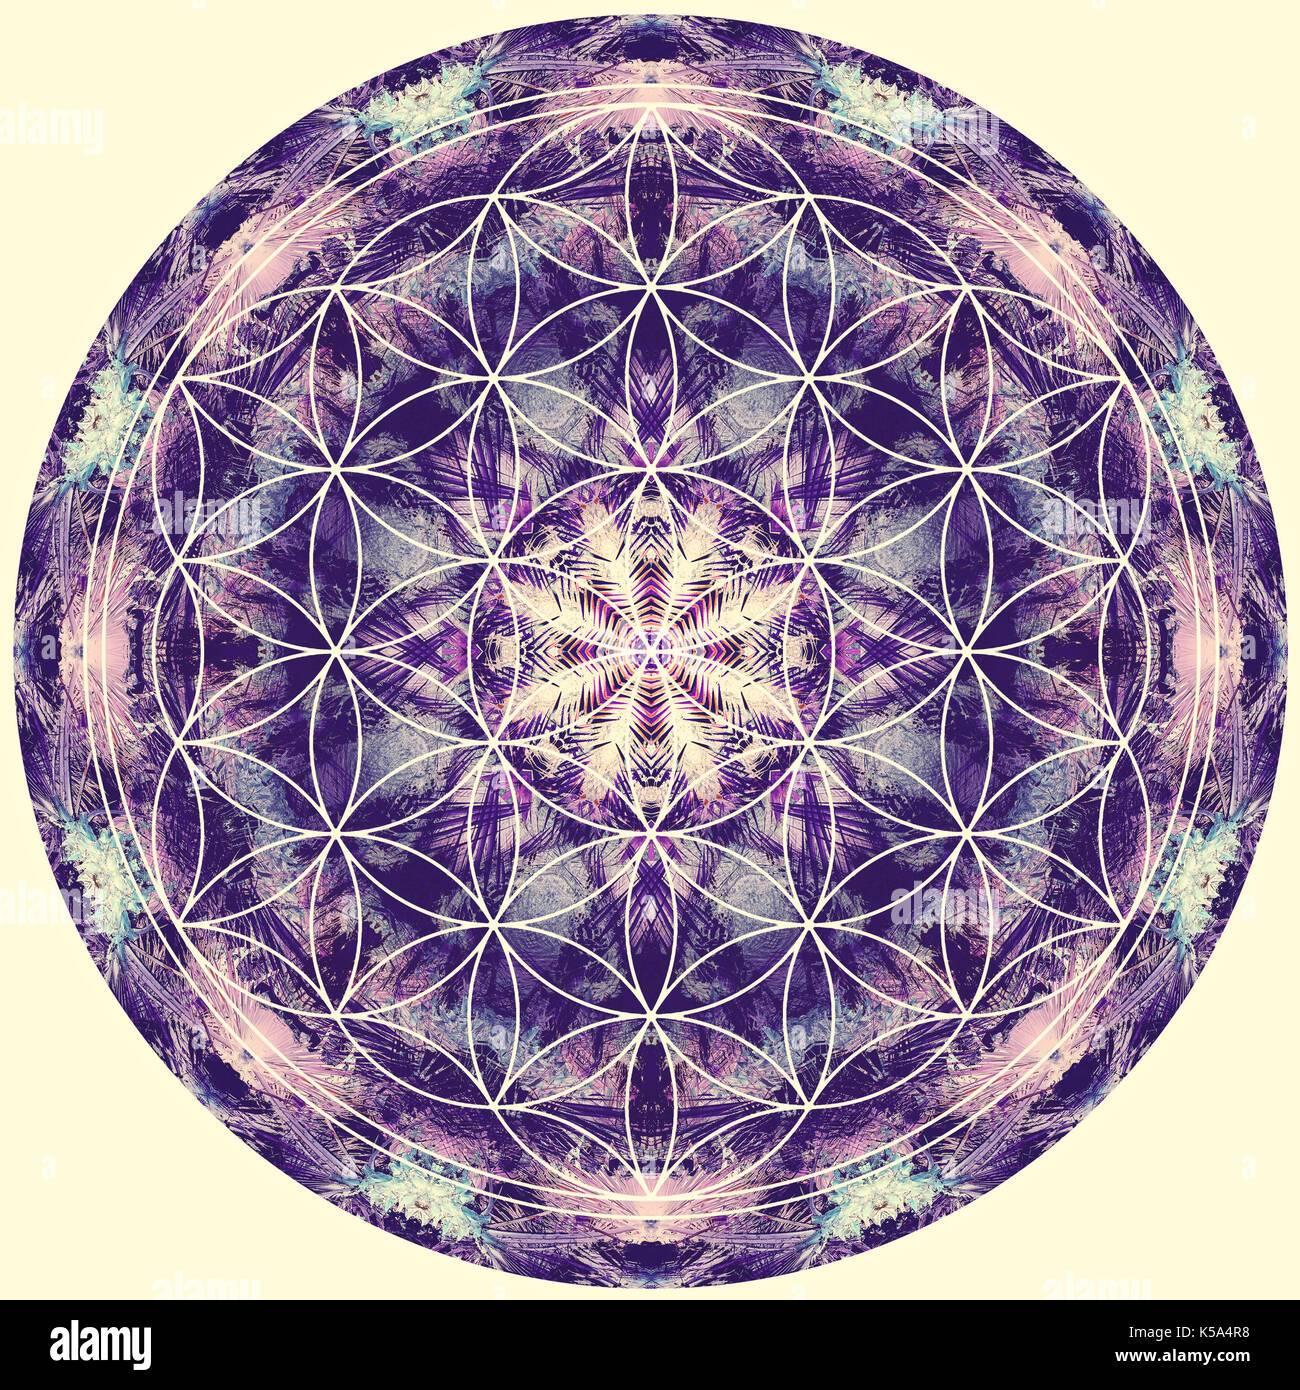 Abstract Mandala picture Stock Photo